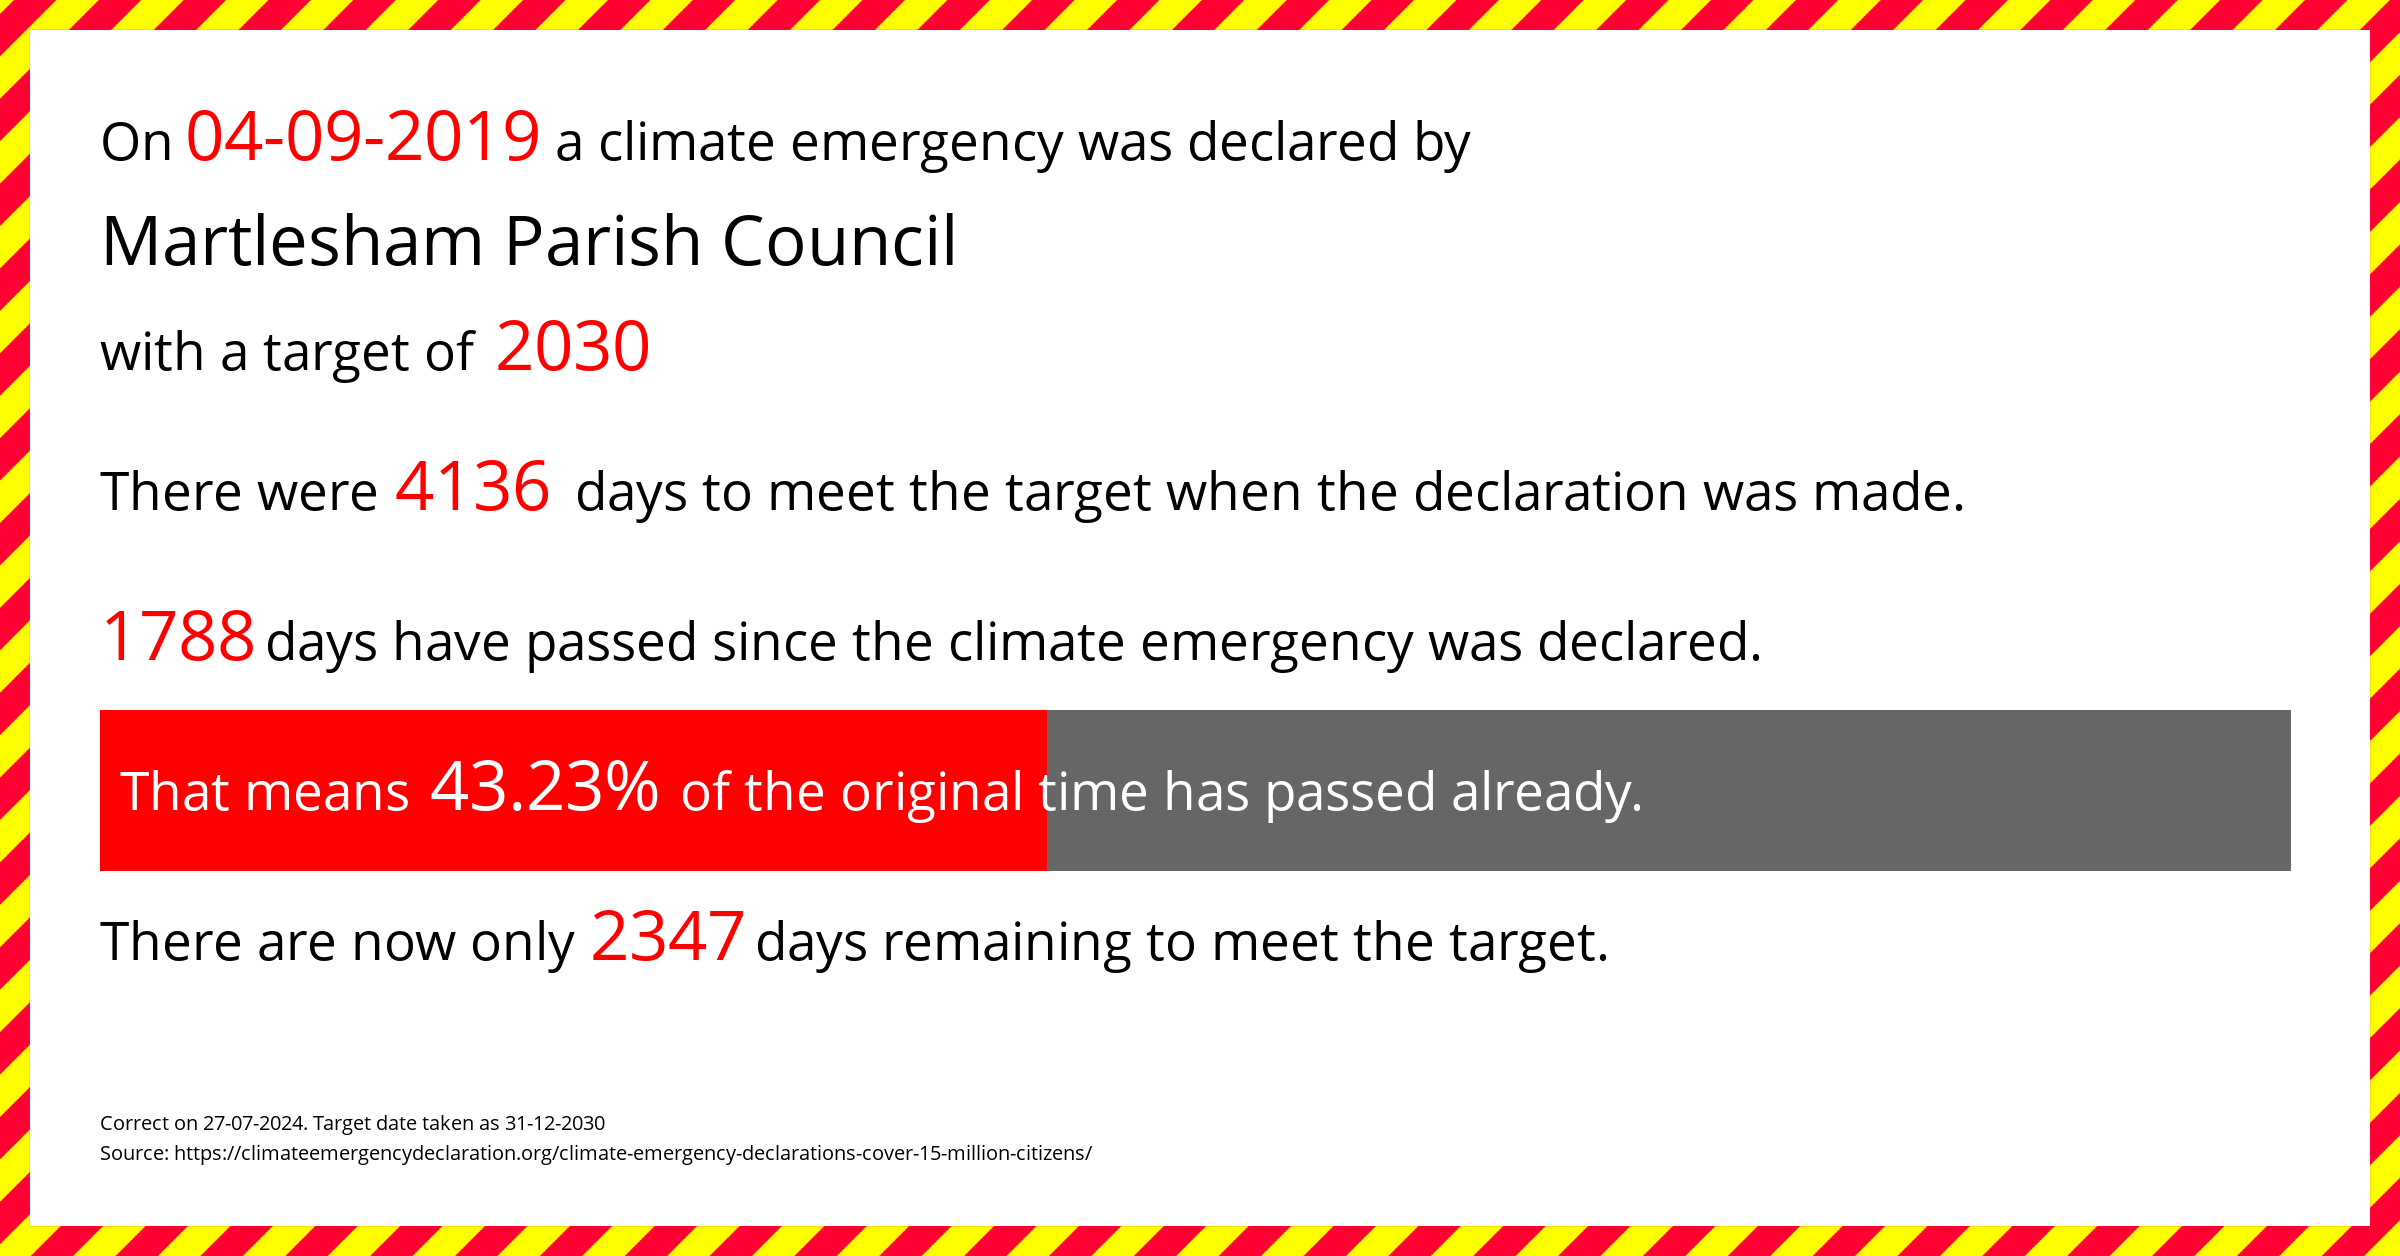 Martlesham Parish Council  declared a Climate emergency on Wednesday 4th September 2019, with a target of 2030.